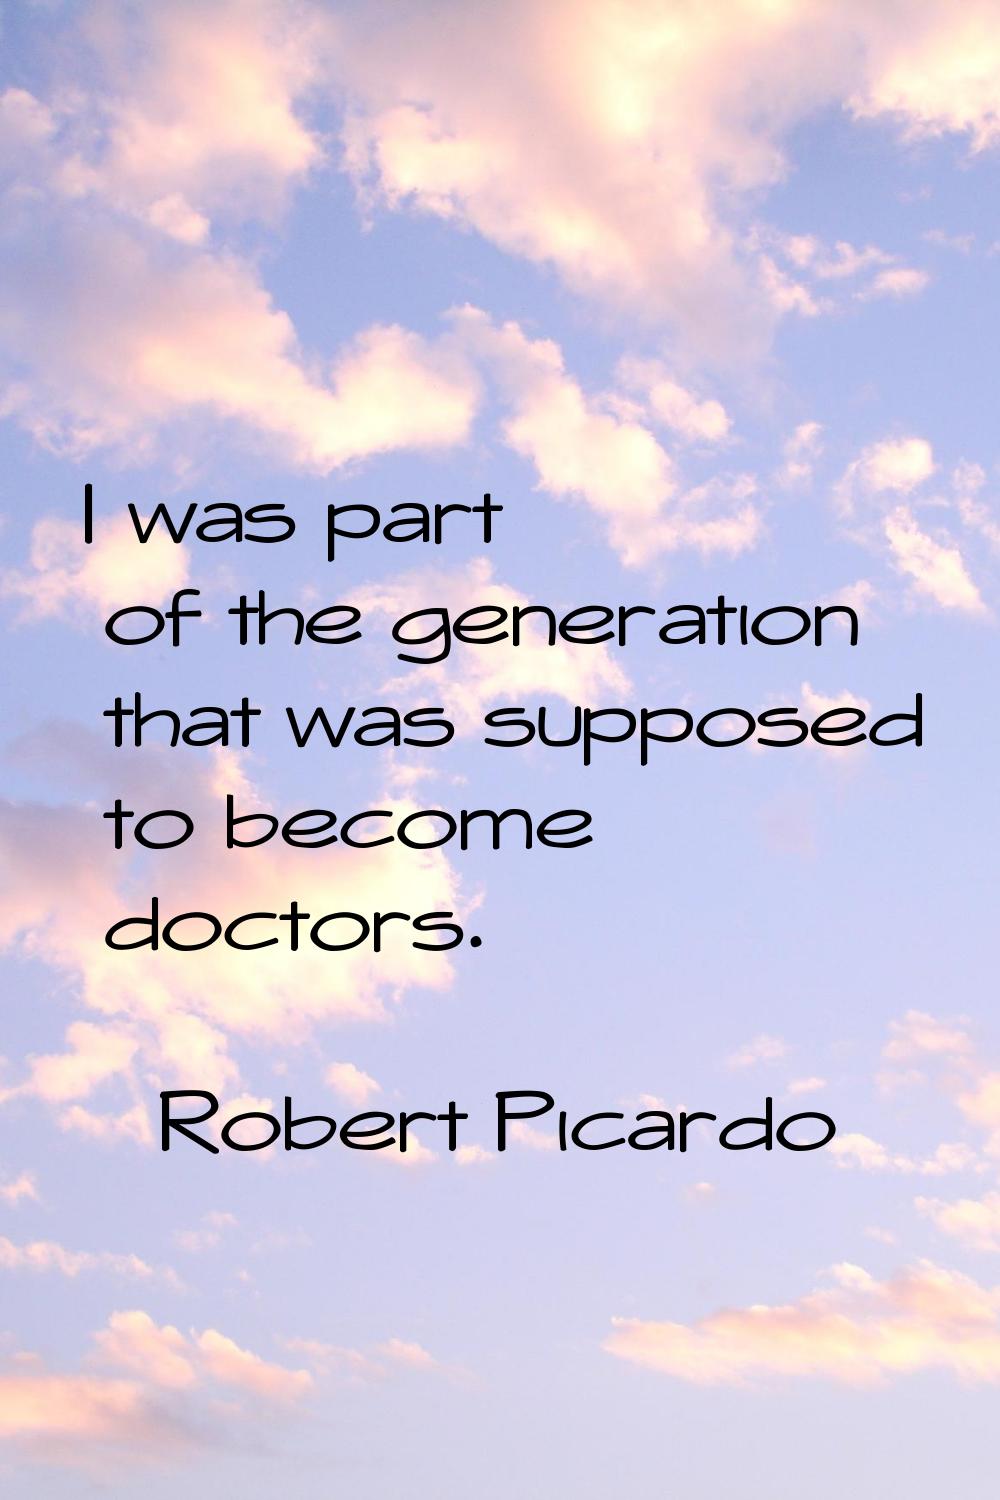 I was part of the generation that was supposed to become doctors.